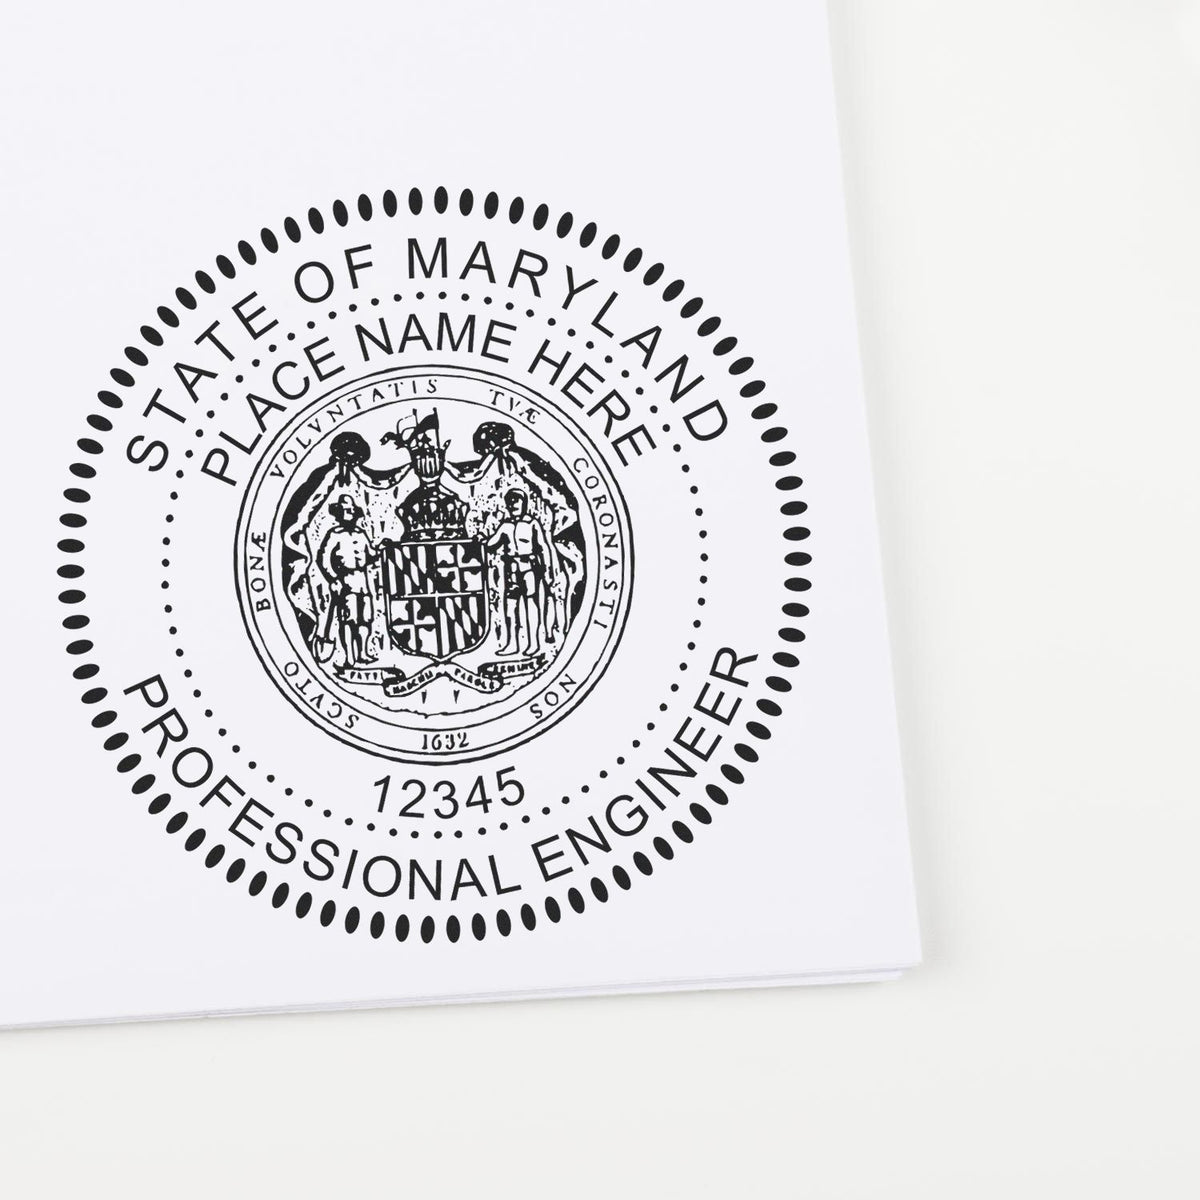 This paper is stamped with a sample imprint of the Maryland Professional Engineer Seal Stamp, signifying its quality and reliability.